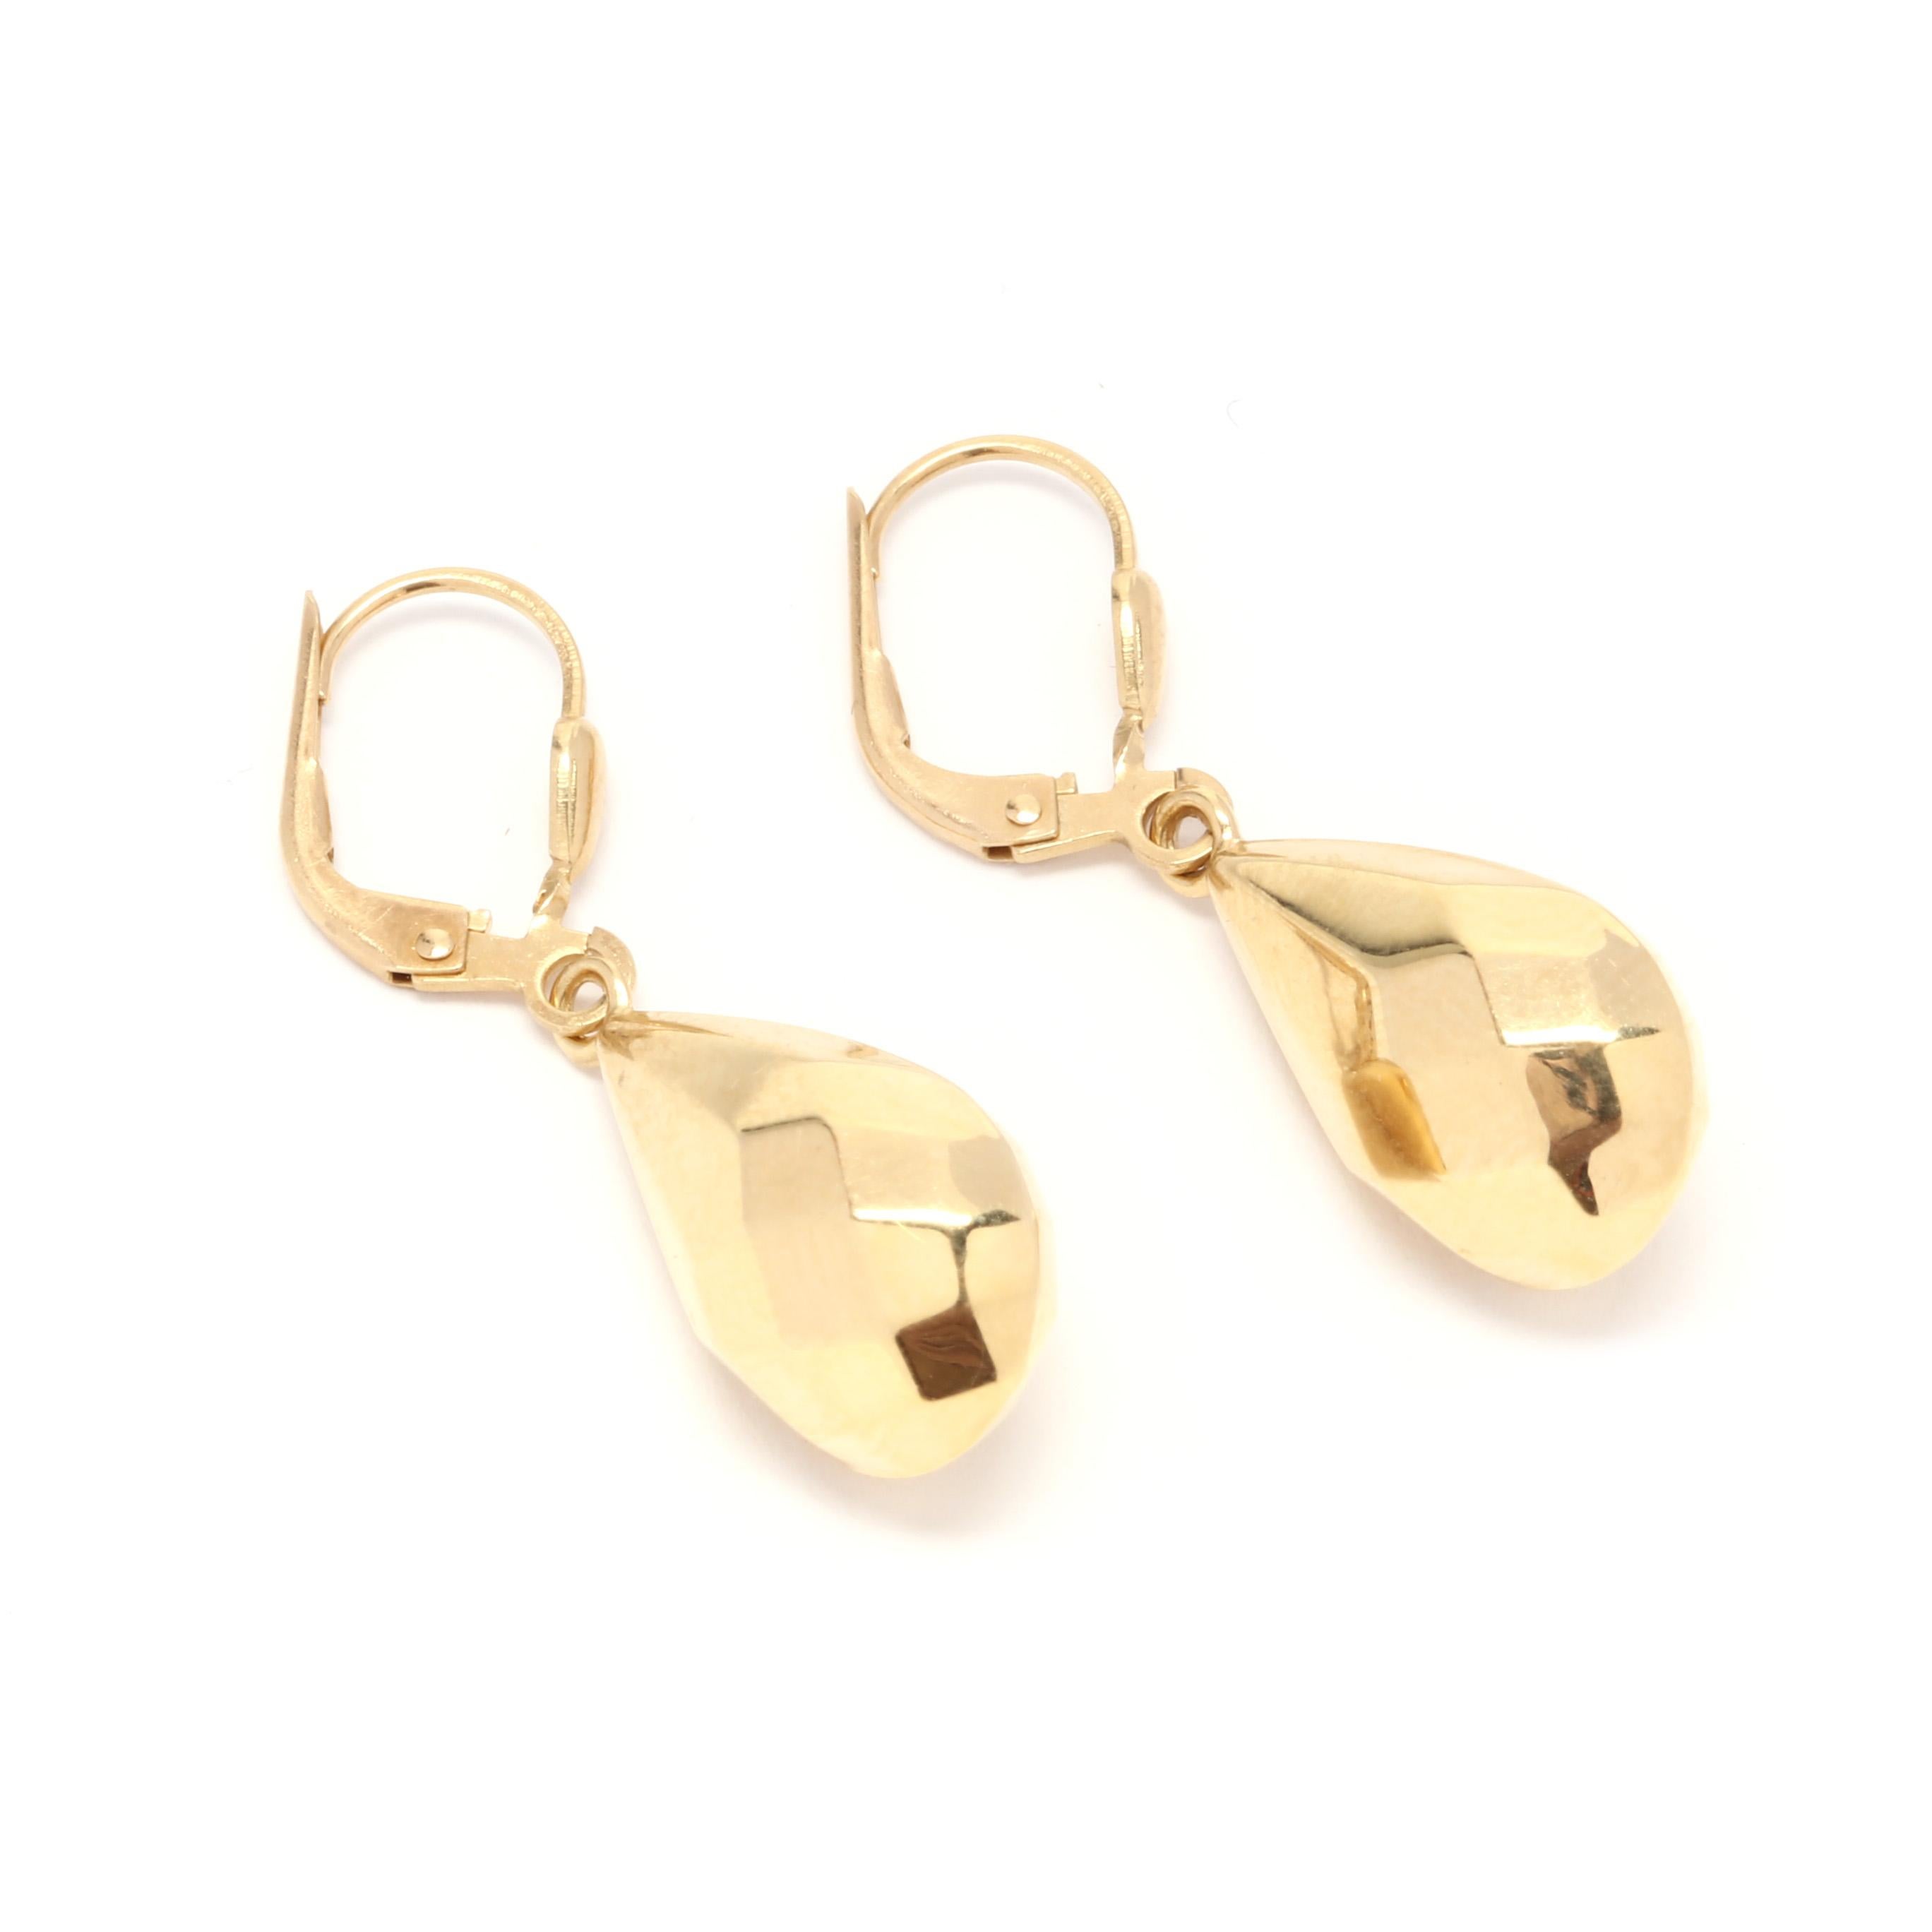 A pair of 18 karat yellow gold faceted tear drop dangle earrings. A puffed, faceted teardrop dangle design suspended from lever back closures.  

Length: 1 1/4 in.

Width: 7/16 in.

1.76 dwts.

* Please note that this is a vintage item and may show